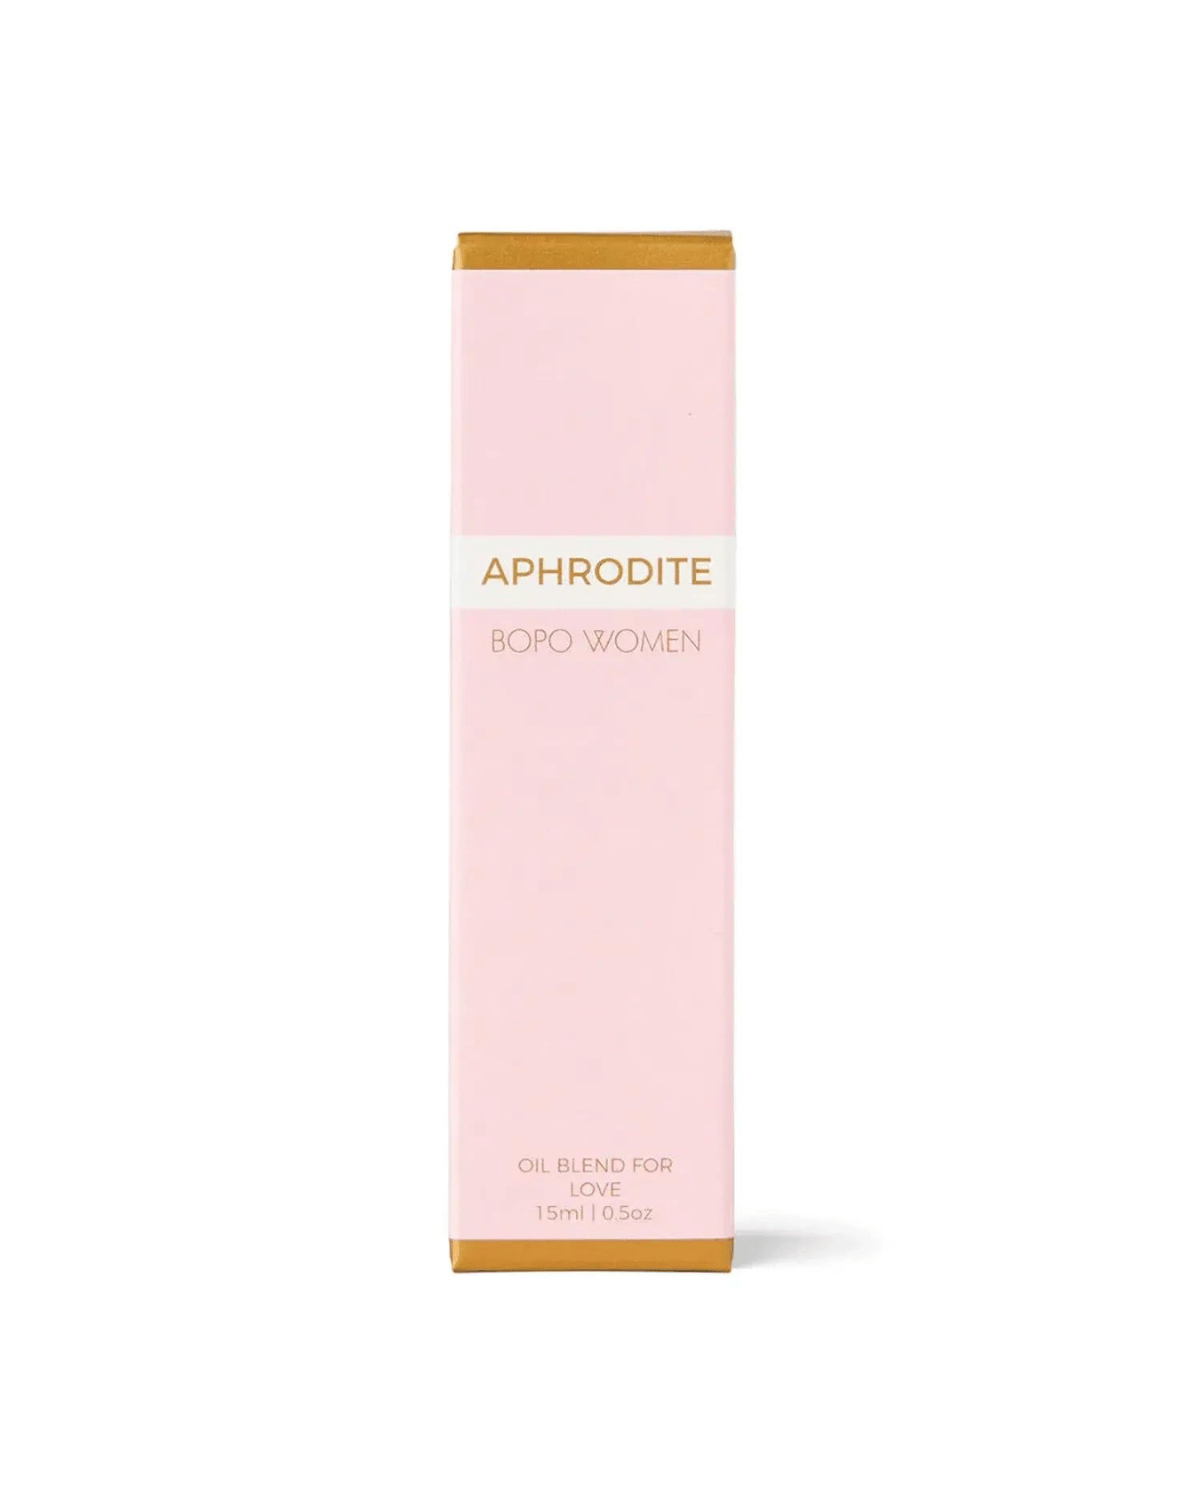 Aphrodite Crystal Infused Natural Perfume Roller by Bopo Women (15ml)